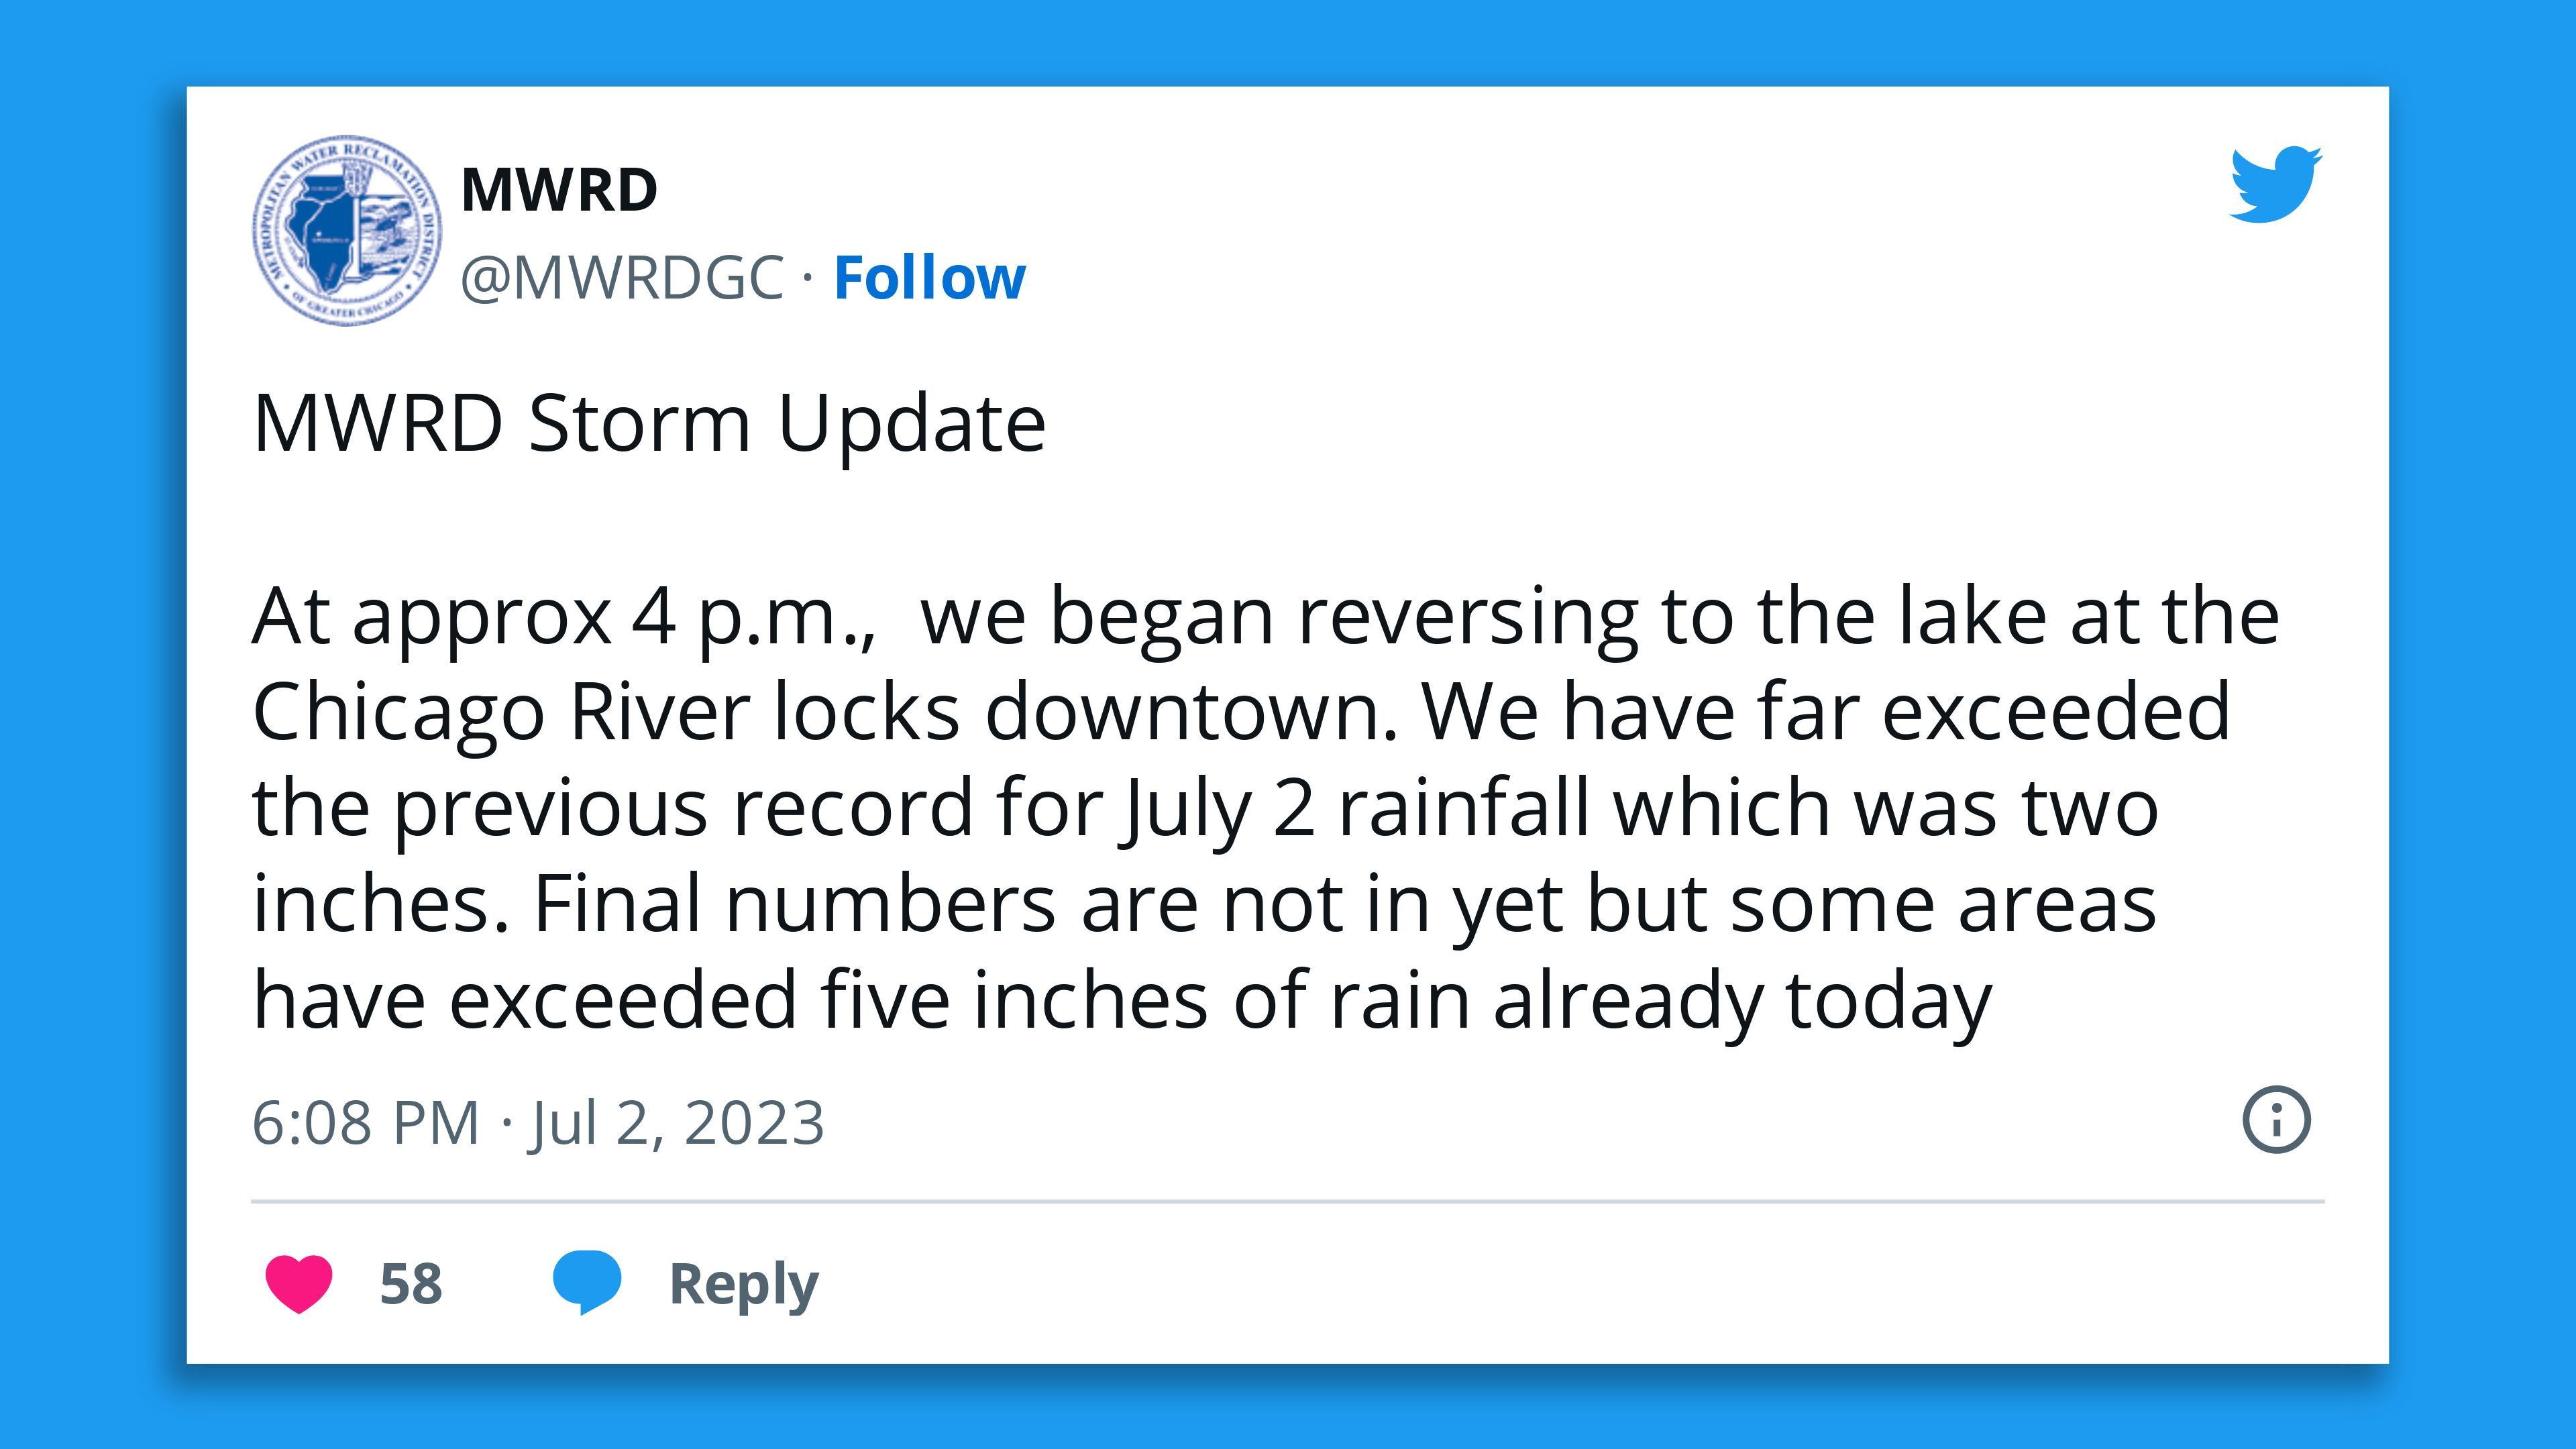 A screenshot of a tweet by the Metropolitan Water Reclamation District of Greater Chicago saying: " At approx 4 p.m.,  we began reversing to the lake at the Chicago River locks downtown. We have far exceeded the previous record for July 2 rainfall which was two inches. Final numbers are not in yet but some areas have exceeded five inches of rain already today."